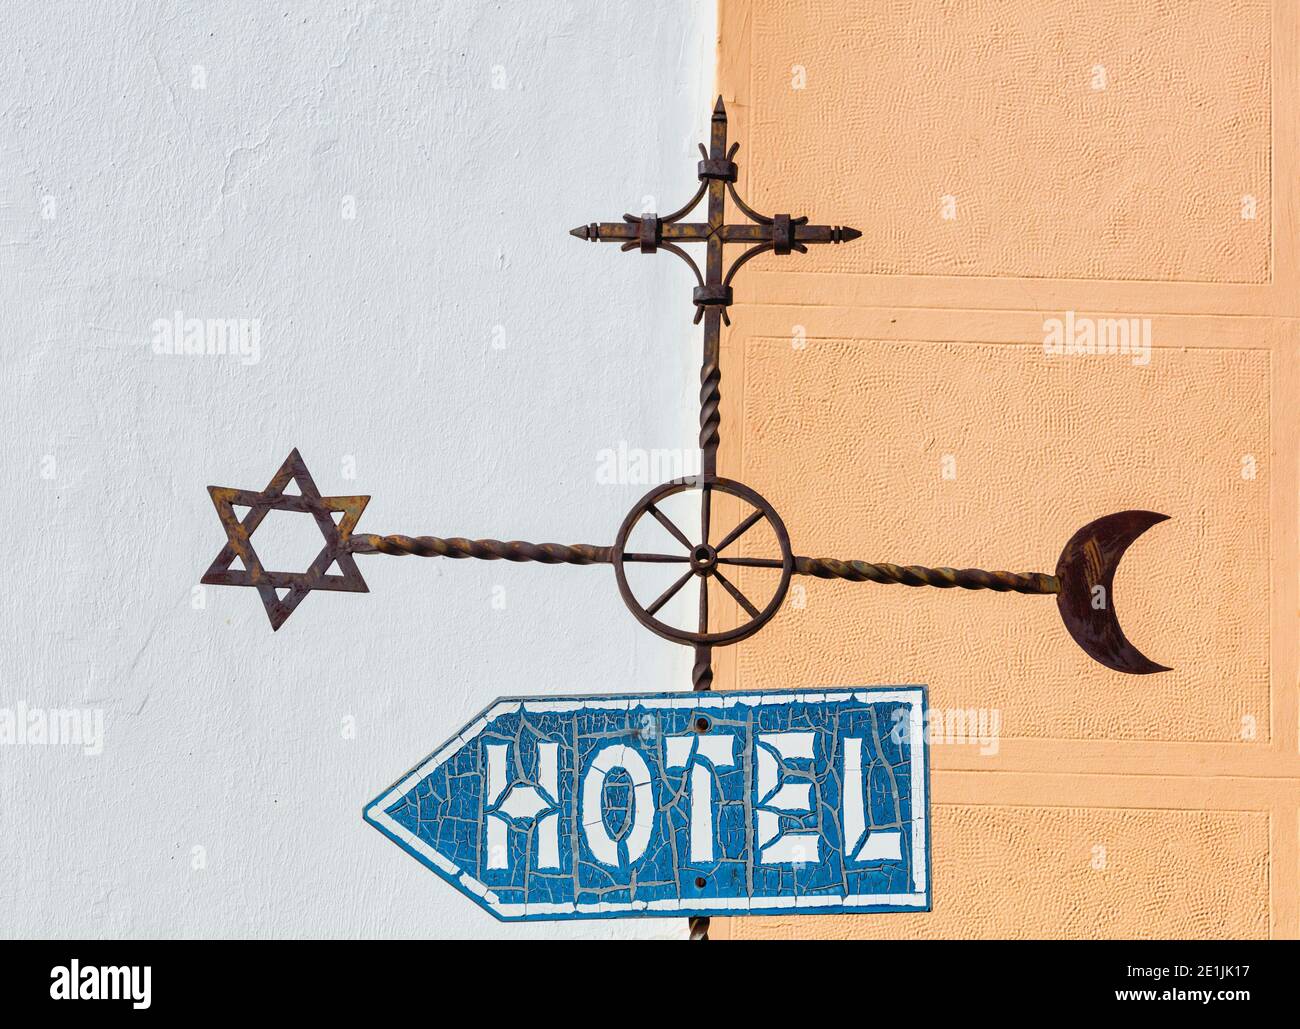 Ronda, Malaga Province, Andalusia, Spain.  Hotel street sign with Islamic, Jewish and Christian symbols which echo city history. Stock Photo